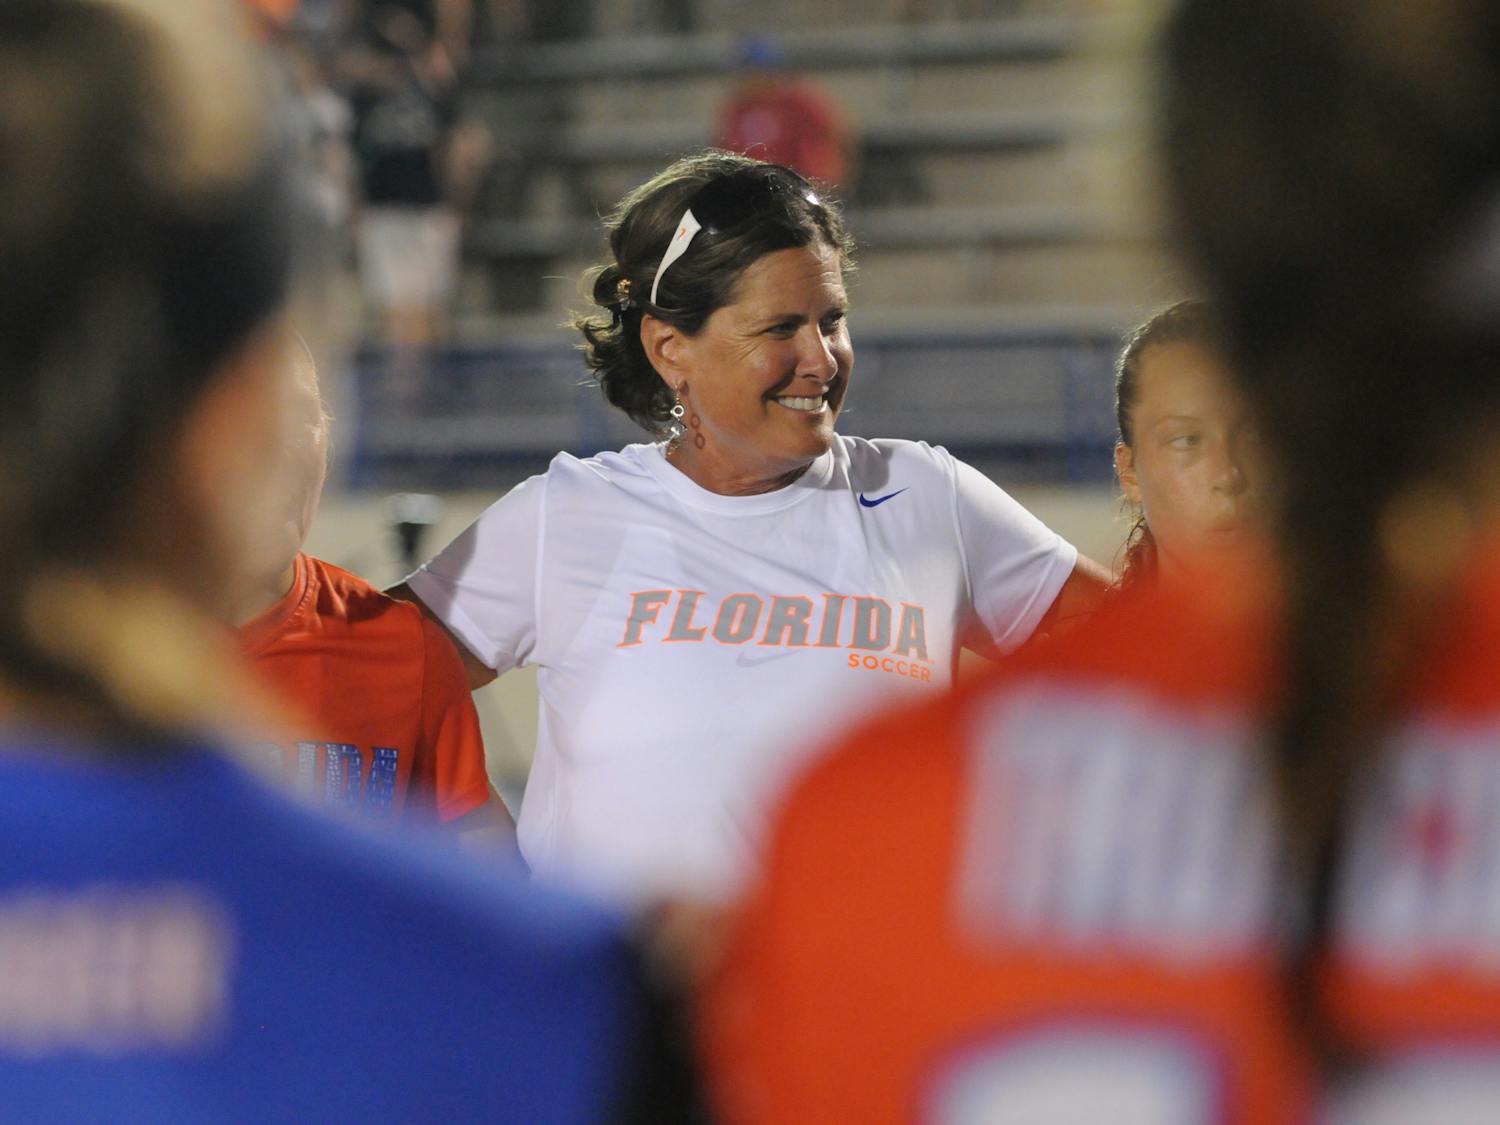 UF soccer coach Becky Burleigh talks with her team following Florida's 5-2 win against Iowa State on Aug. 19, 2016, at James G. Pressly Stadium.